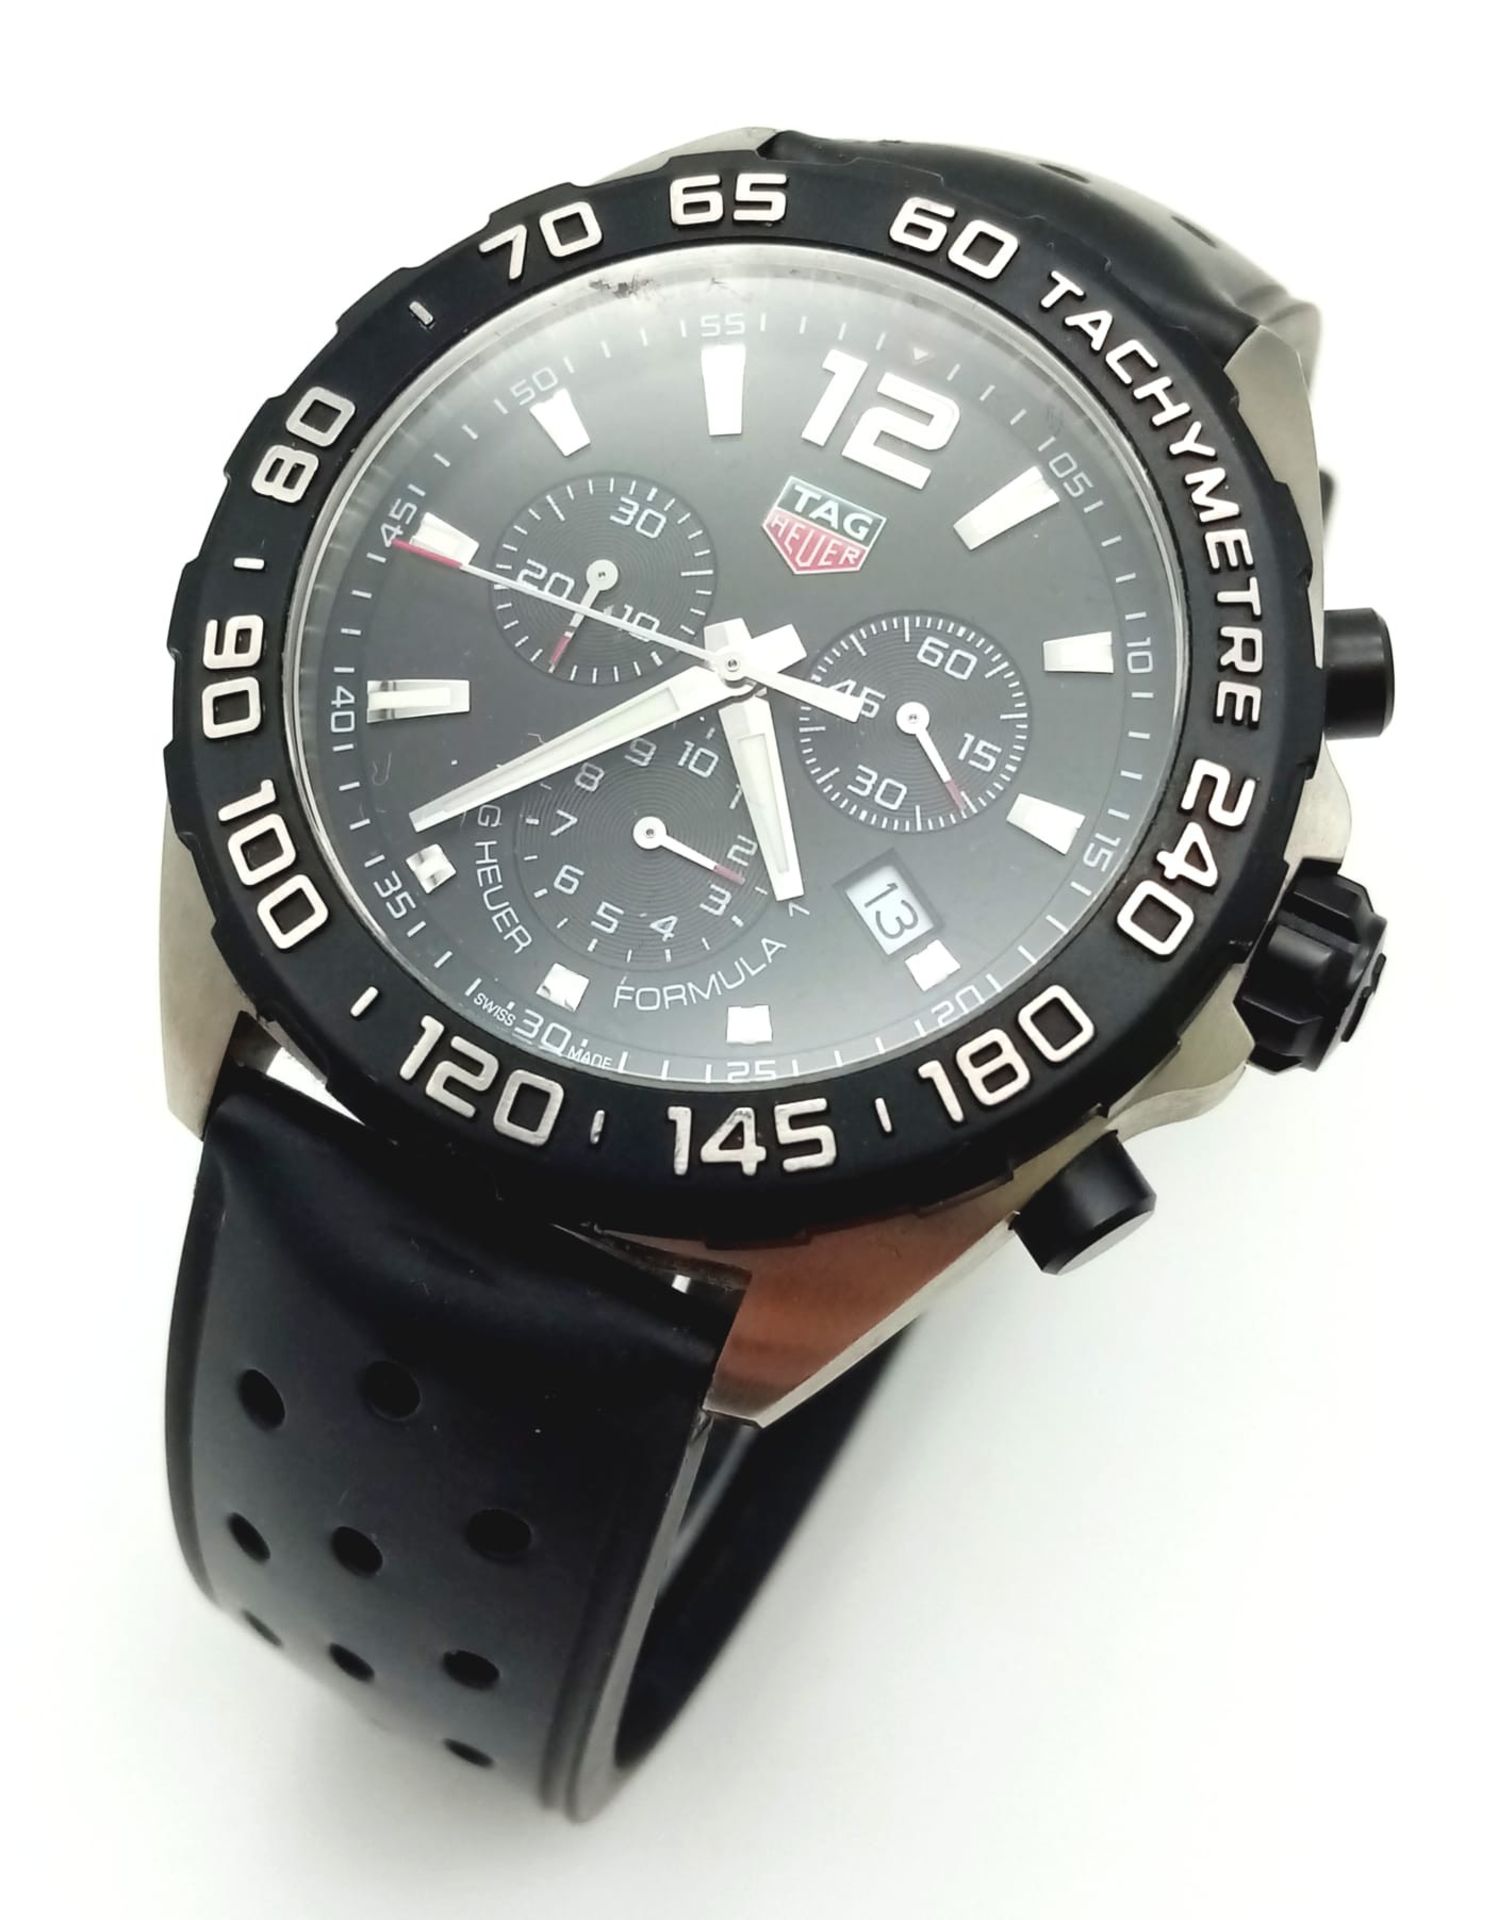 A Tag Heuer Formula Gents Chronograph Watch. Black rubber strap. Black dial with three sub dials.